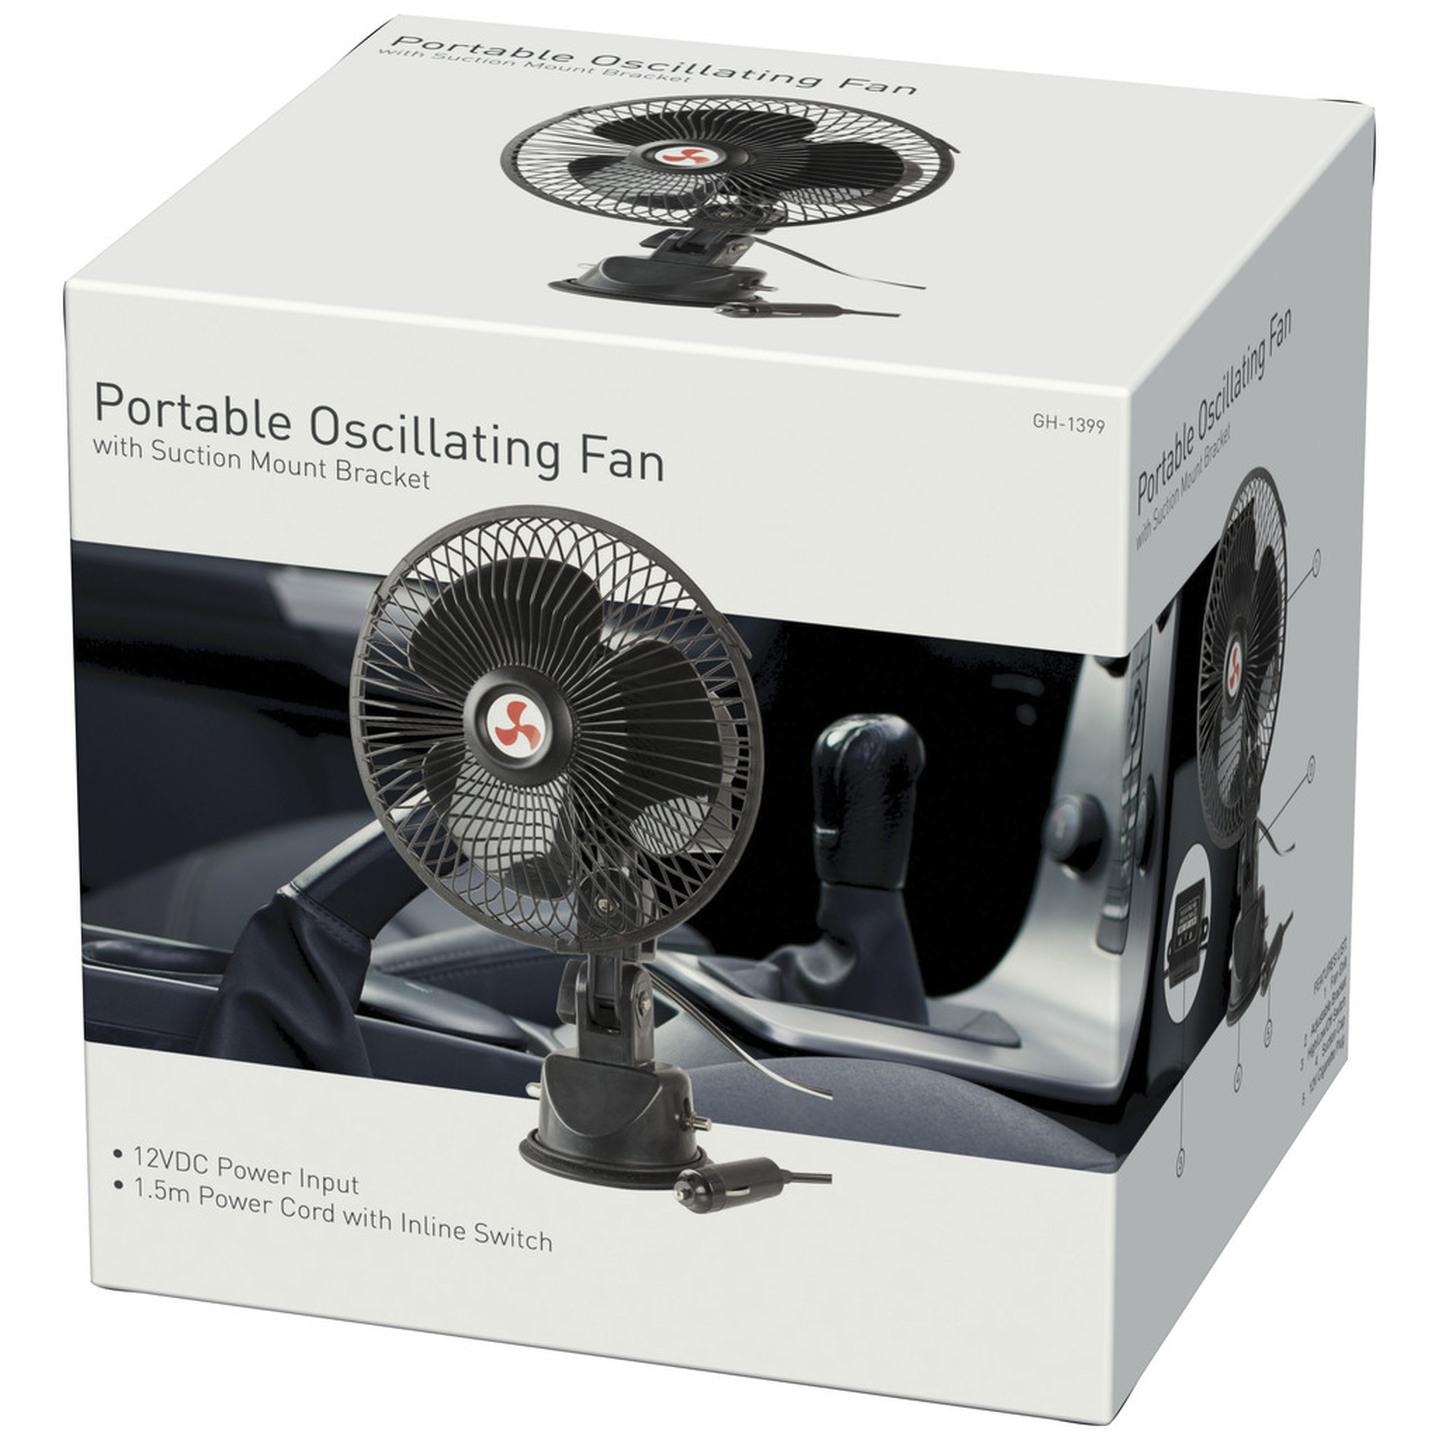 12VDC Oscillating Fan with Suction Mount Bracket